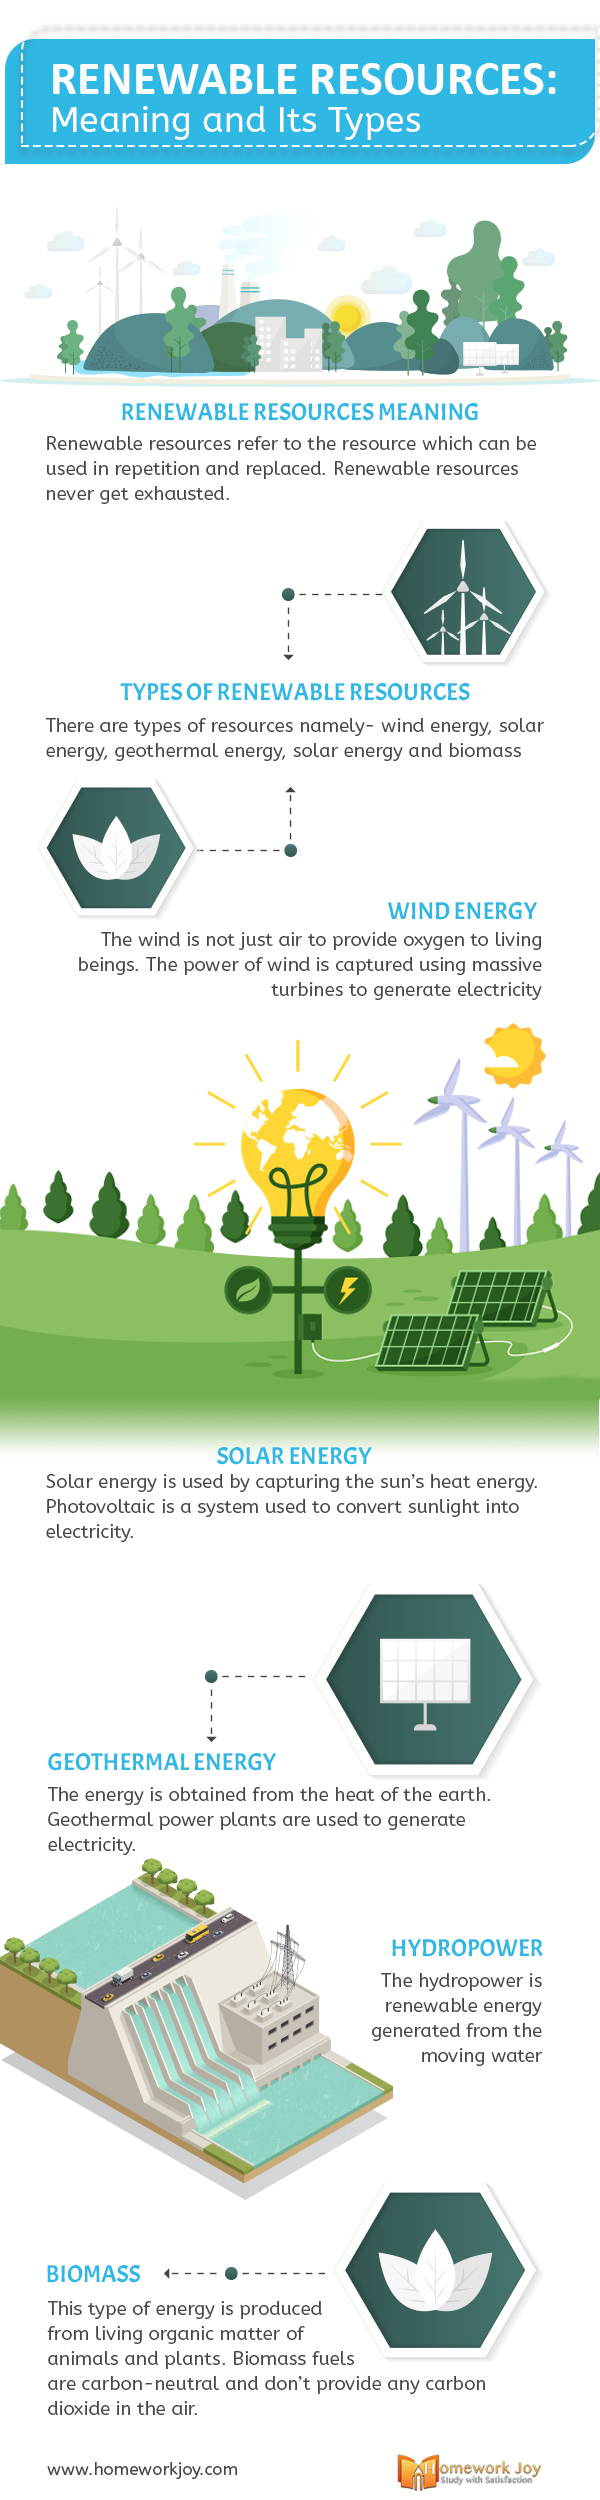 Renewable-Resources-Meaning-and-Its-Types